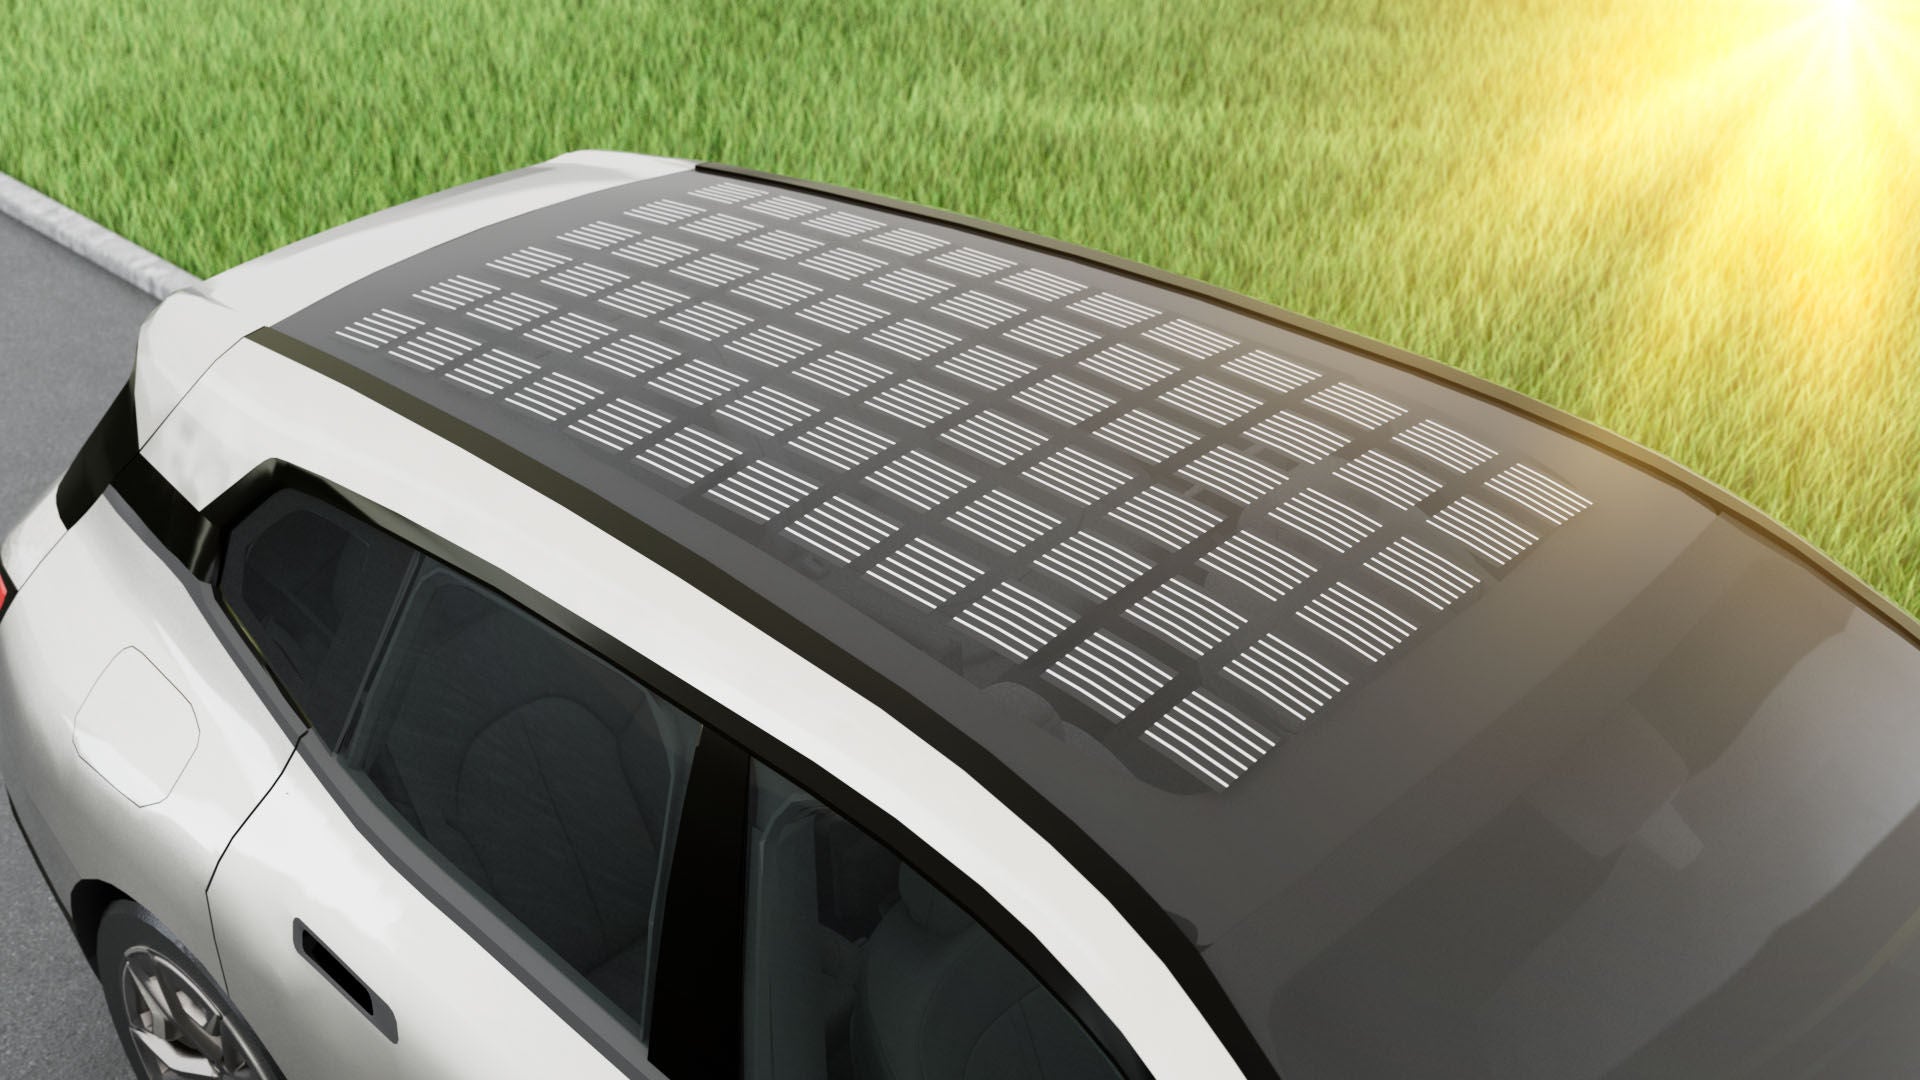 Solar cells in the vehicle roof